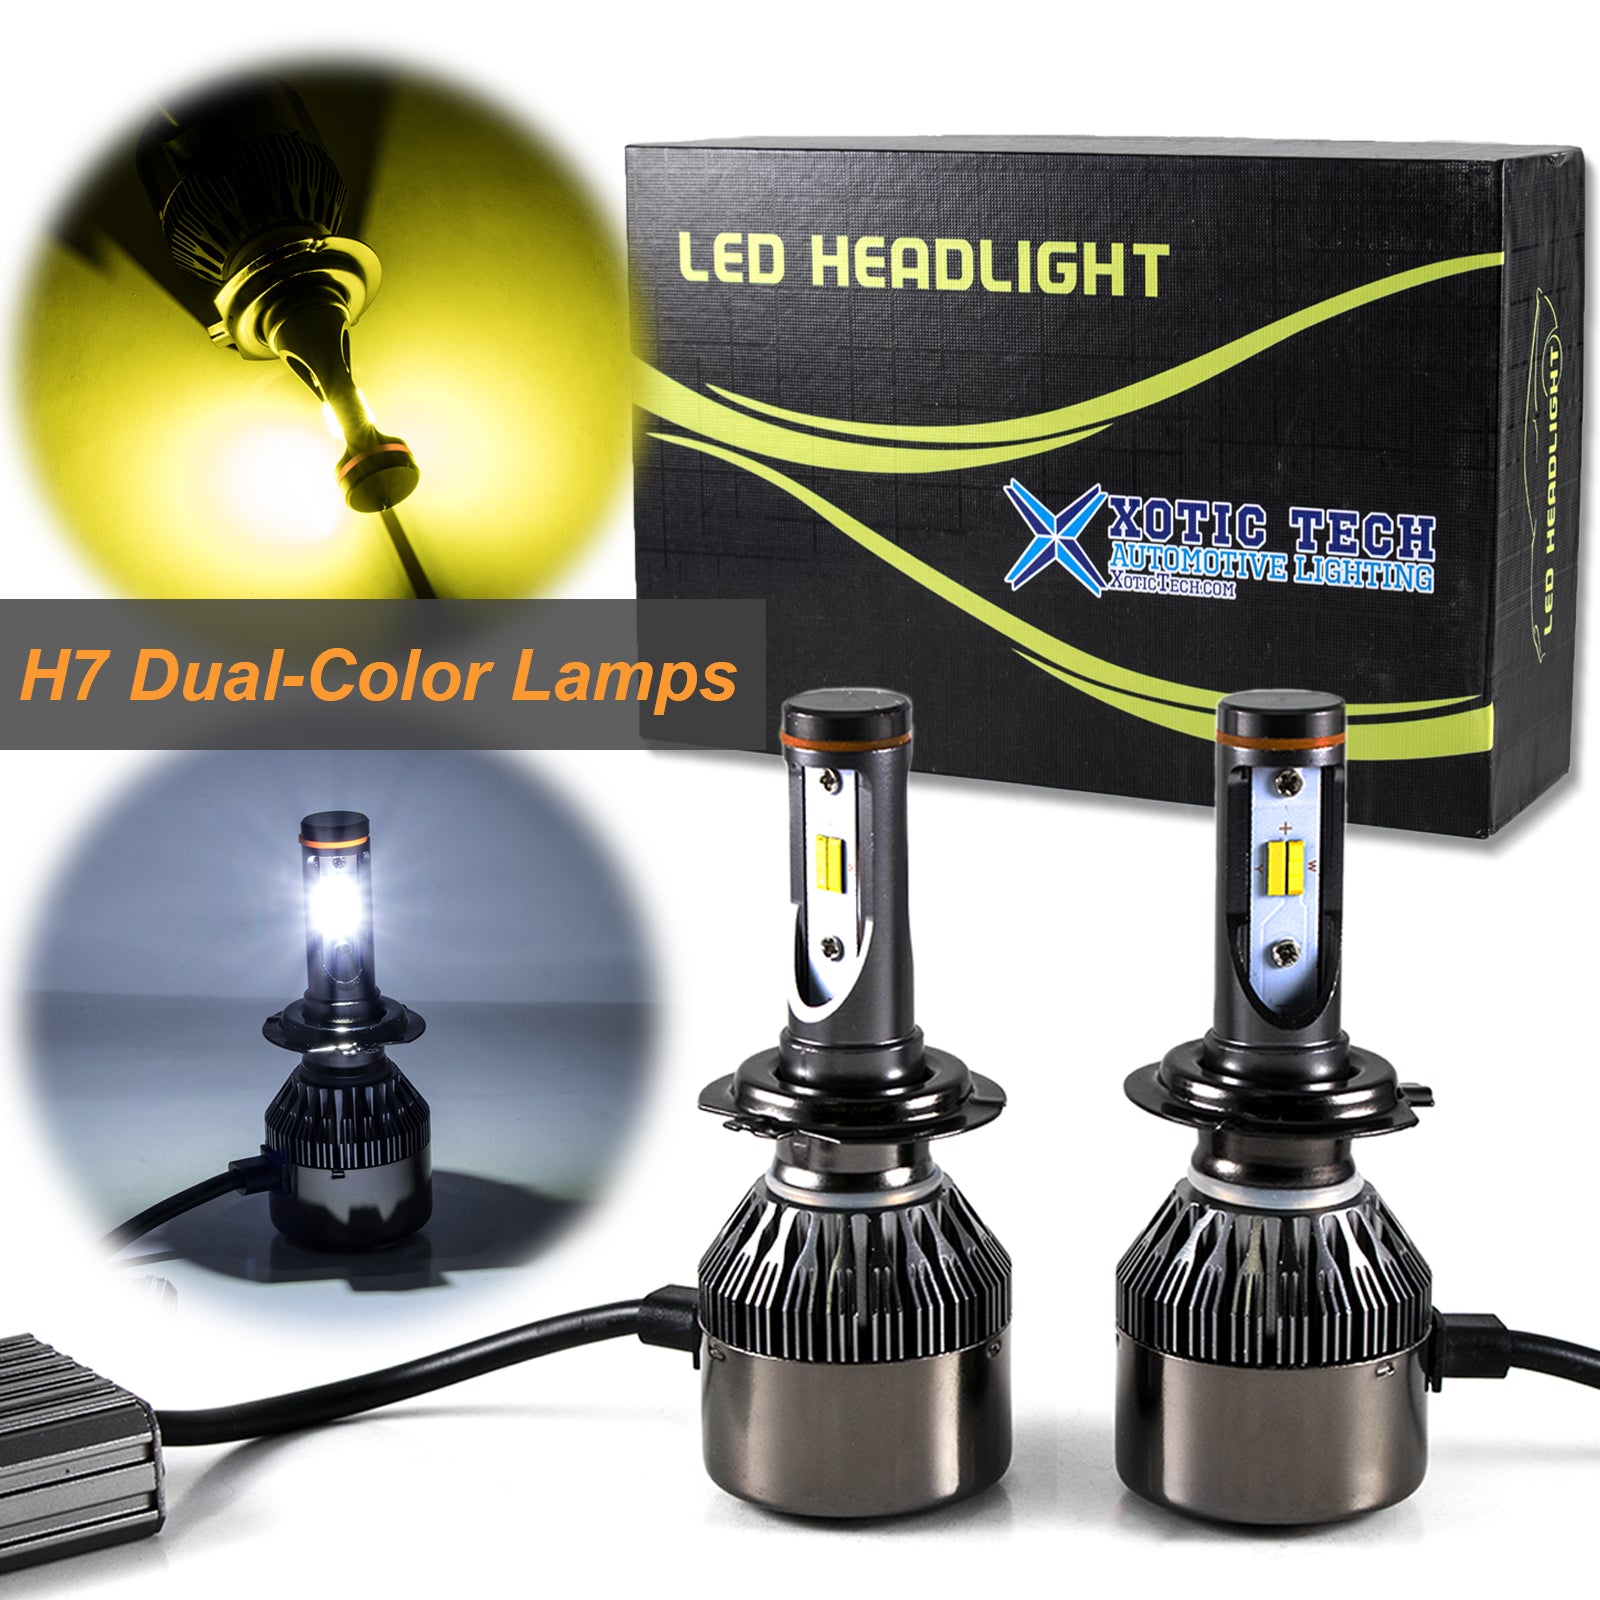 H7 Dual-Color 3000K/6000K HID matching xenon white /yellow LED